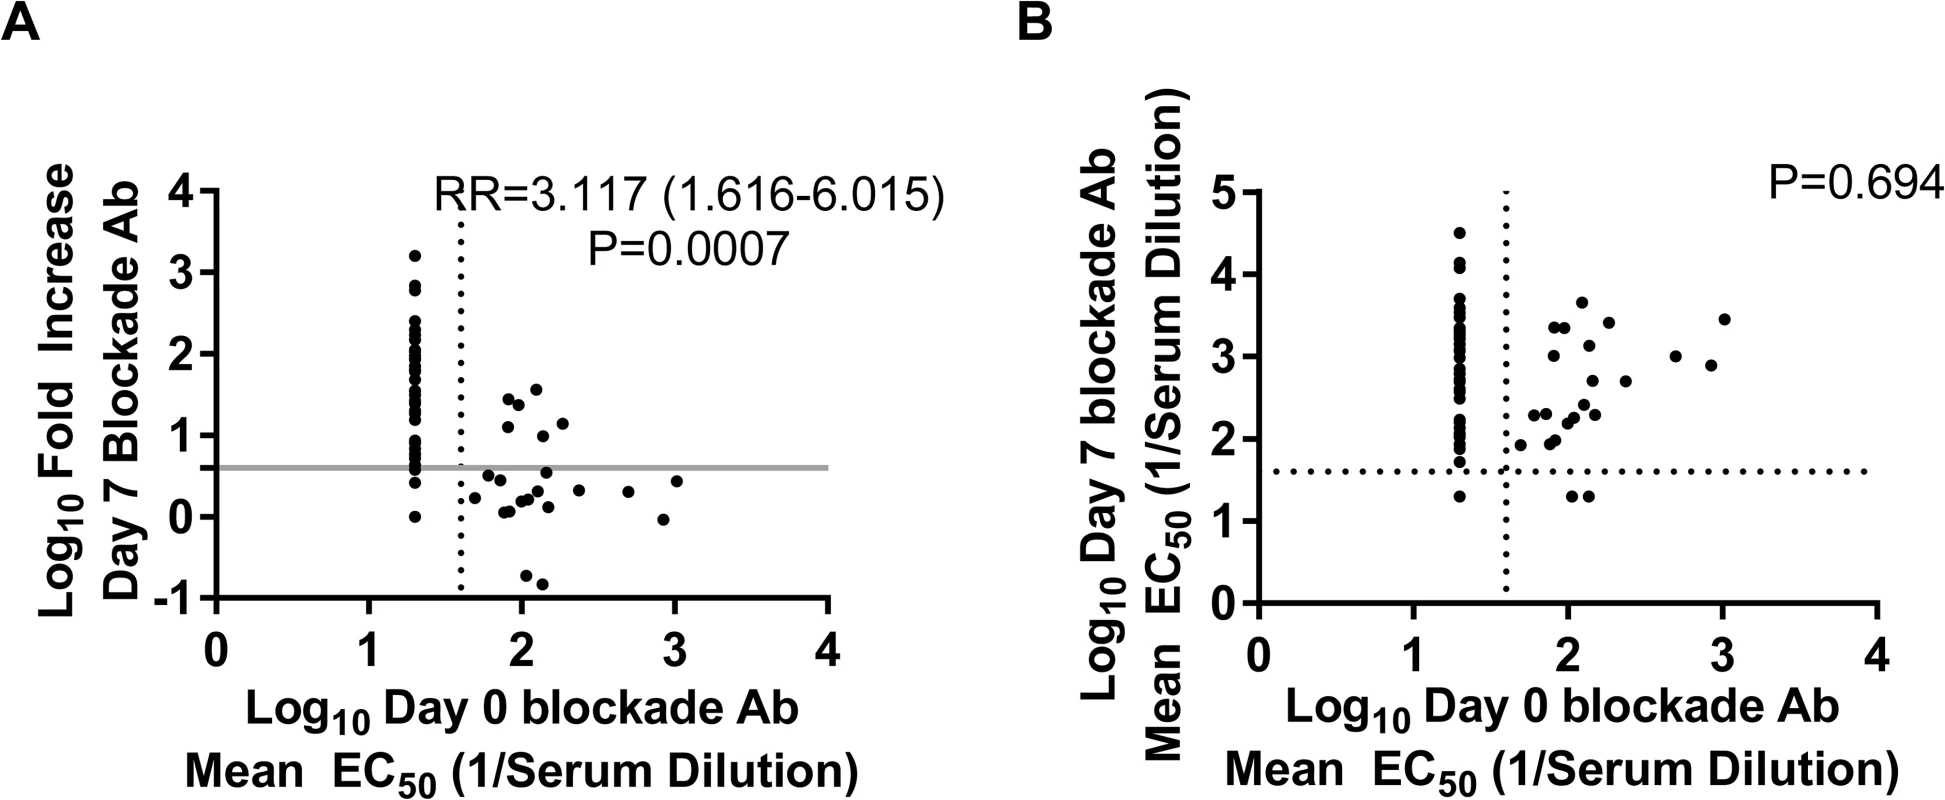 Day 0 blockade antibody titers below the assay limit of detection for any norovirus virus-like particle are predictive of a ≥4-fold increase, but not overall blockade Ab titer, at day 7.